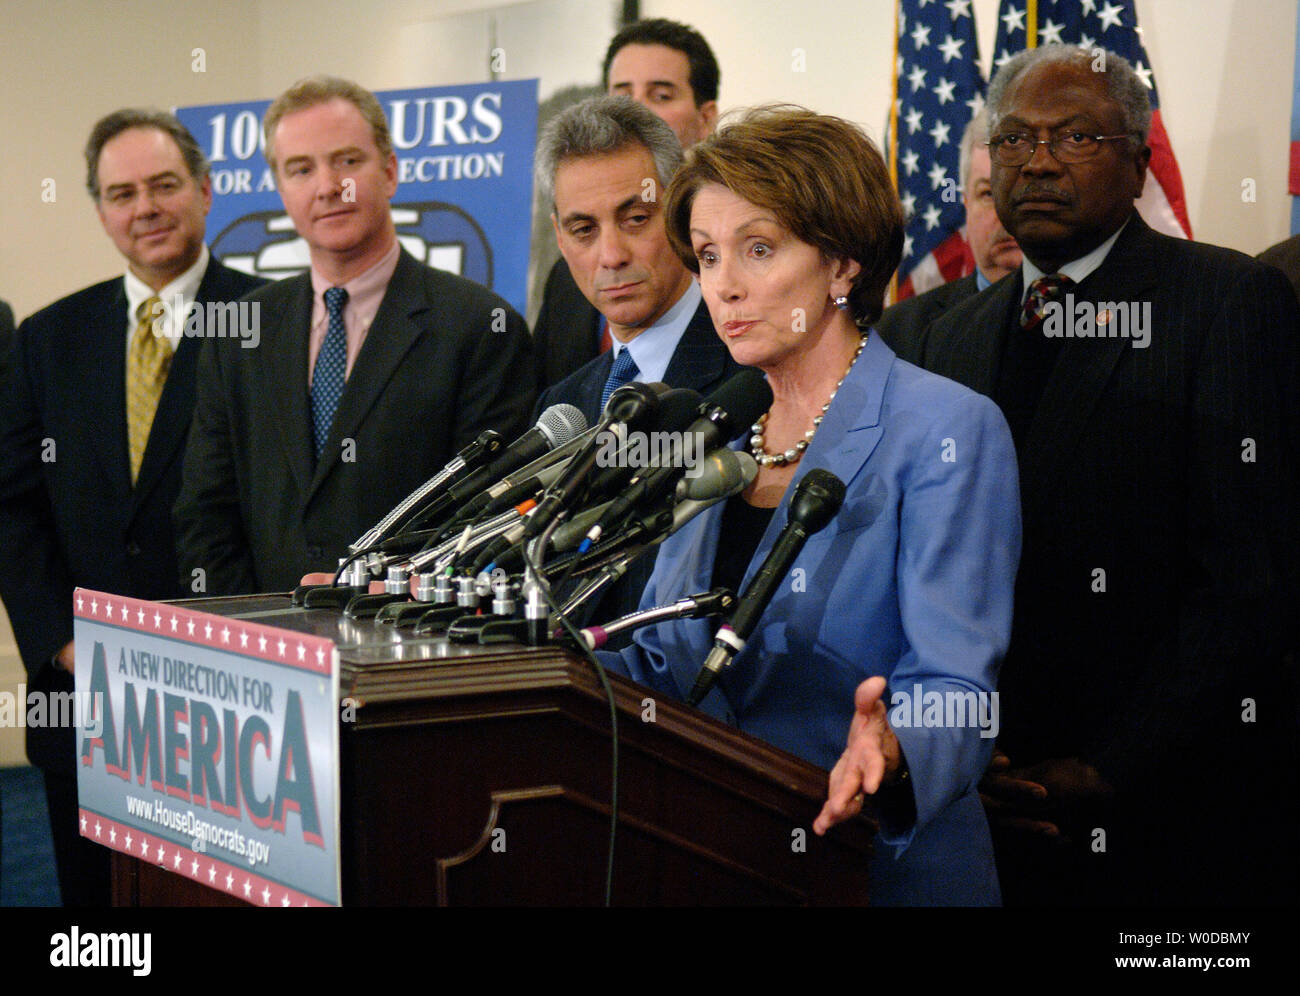 Speaker of the House Nancy Pelosi (D-CA) (2nd-R) speaks alongside Rep. Rahm Emanuel (D-IL) (C), Rep. James Clyburn (D-SC) and members of the freshman class, at a press conference marking the first 100 legislative hours of the new Congress, in Washington on January 18, 2007. (UPI Photo/Kevin Dietsch) Stock Photo